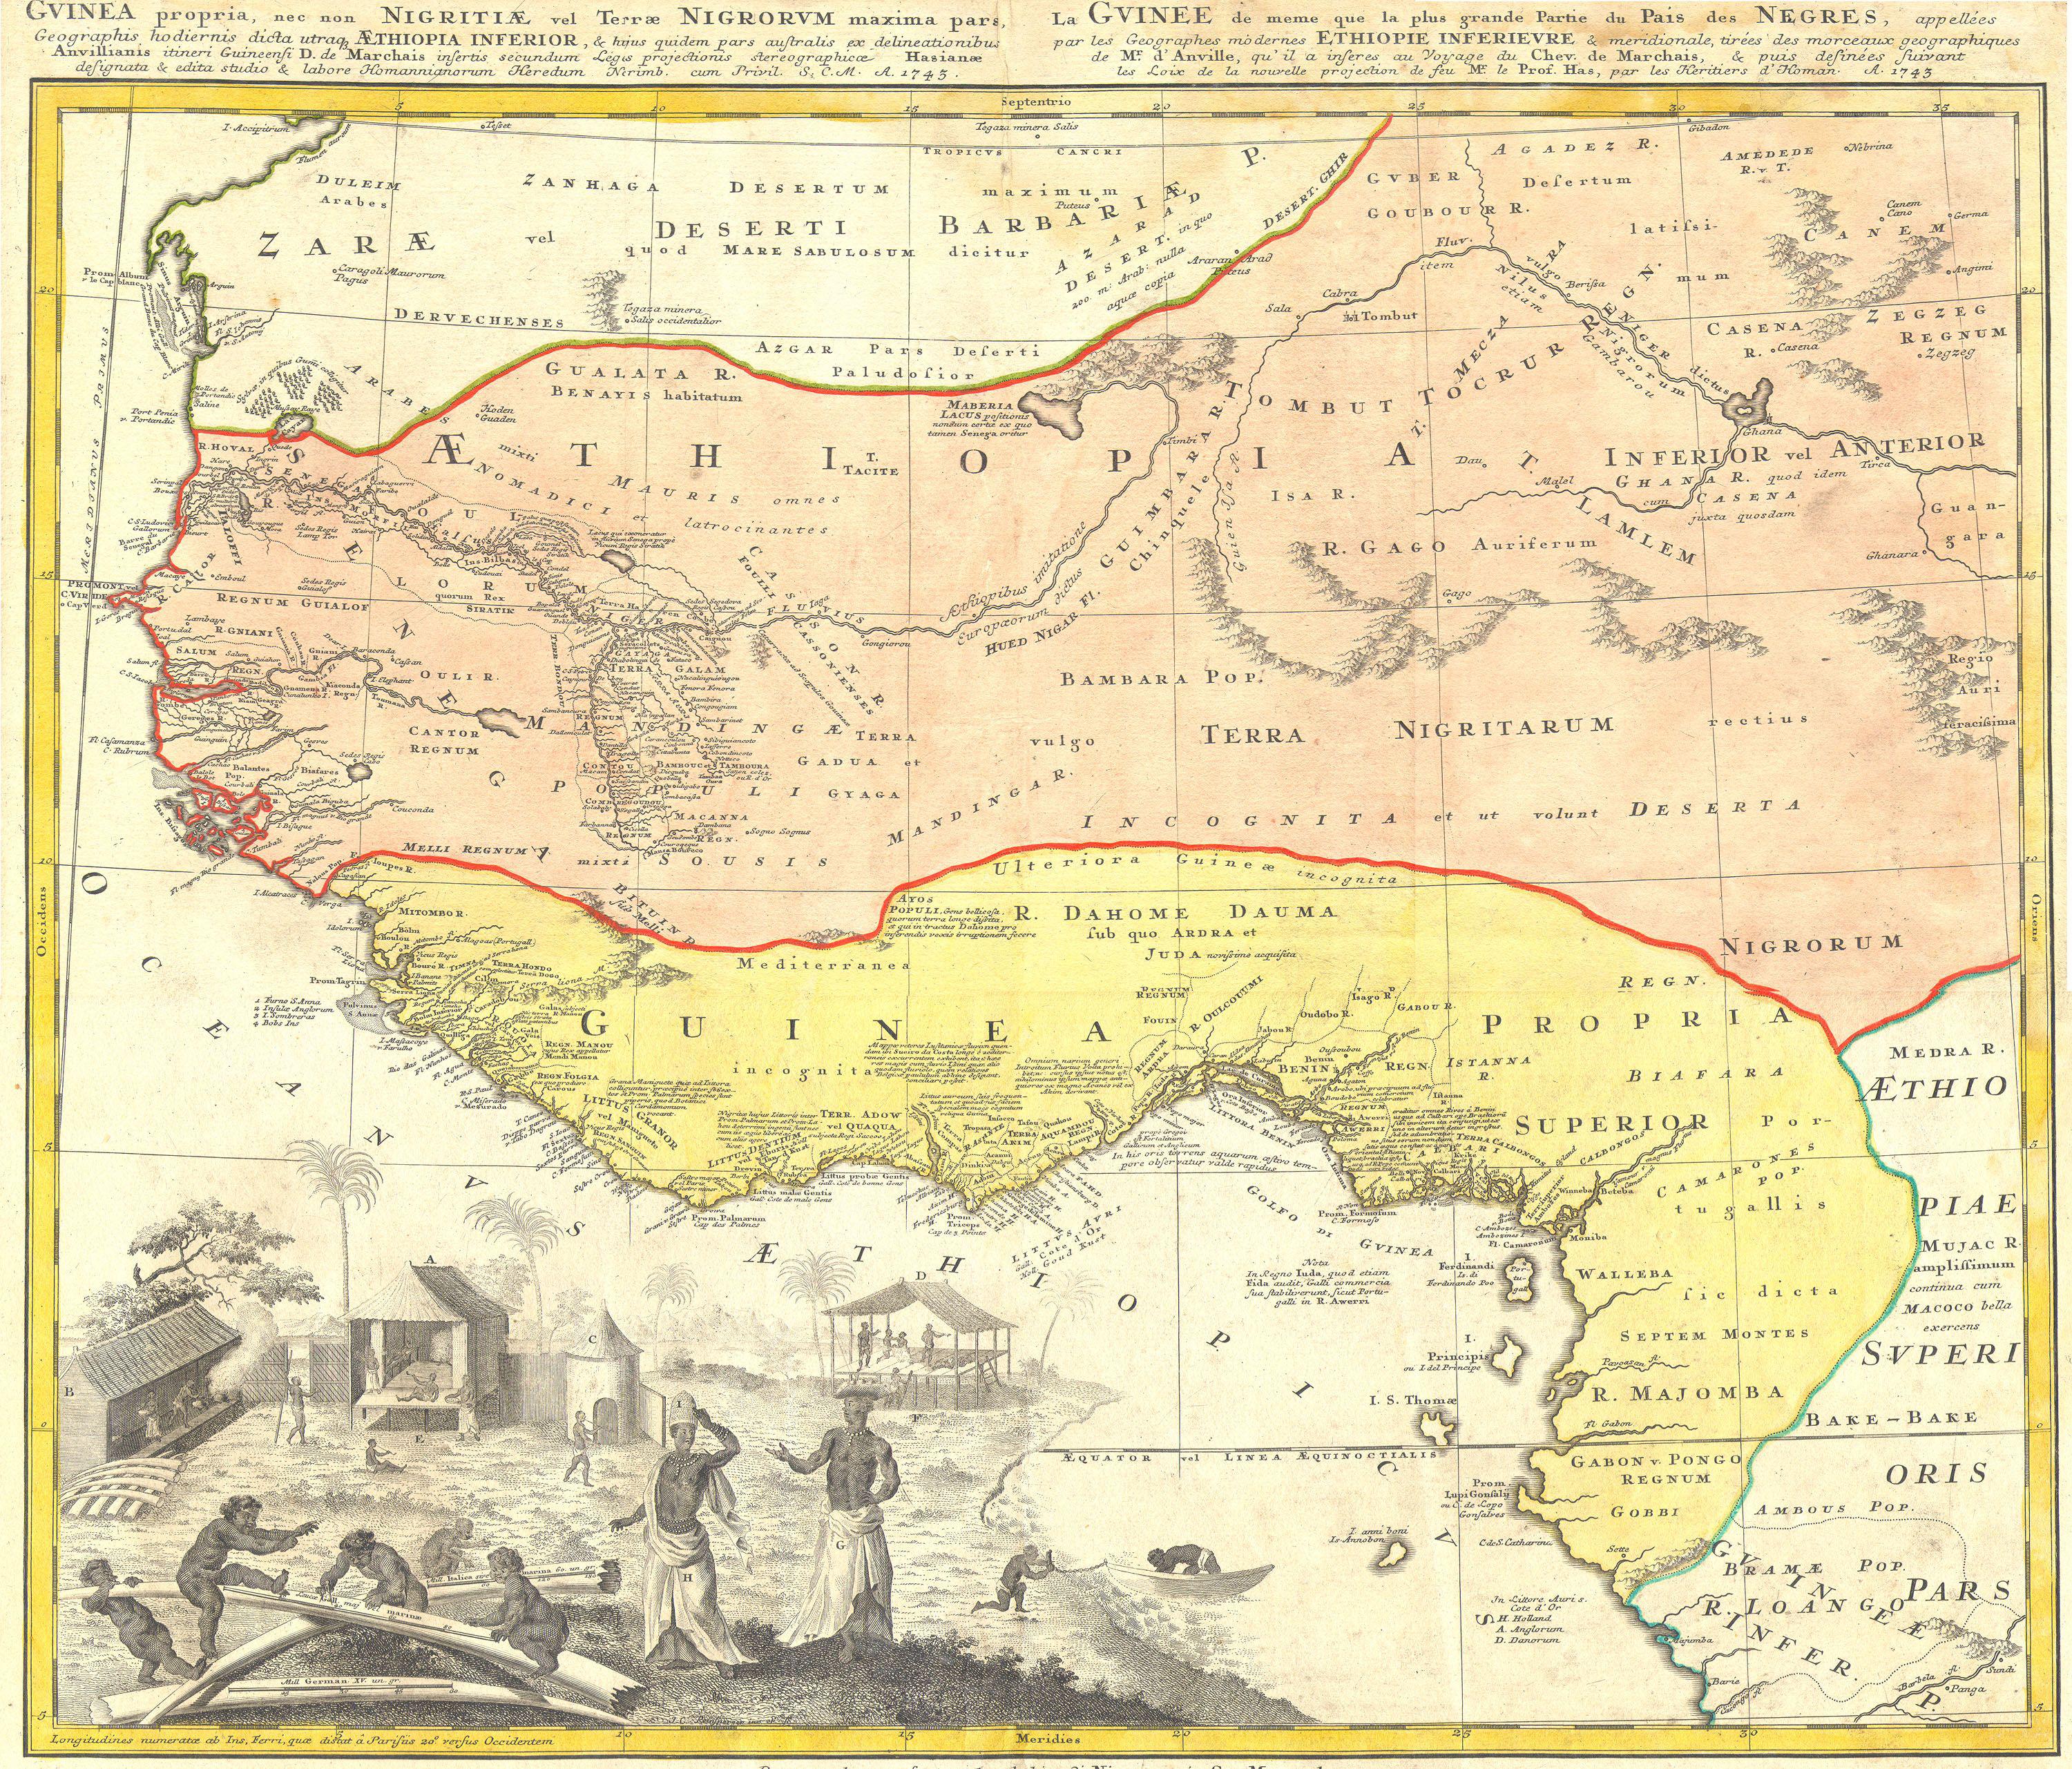 1743 AD: Homann Heirs Map of Juda On The West Coast of Africa